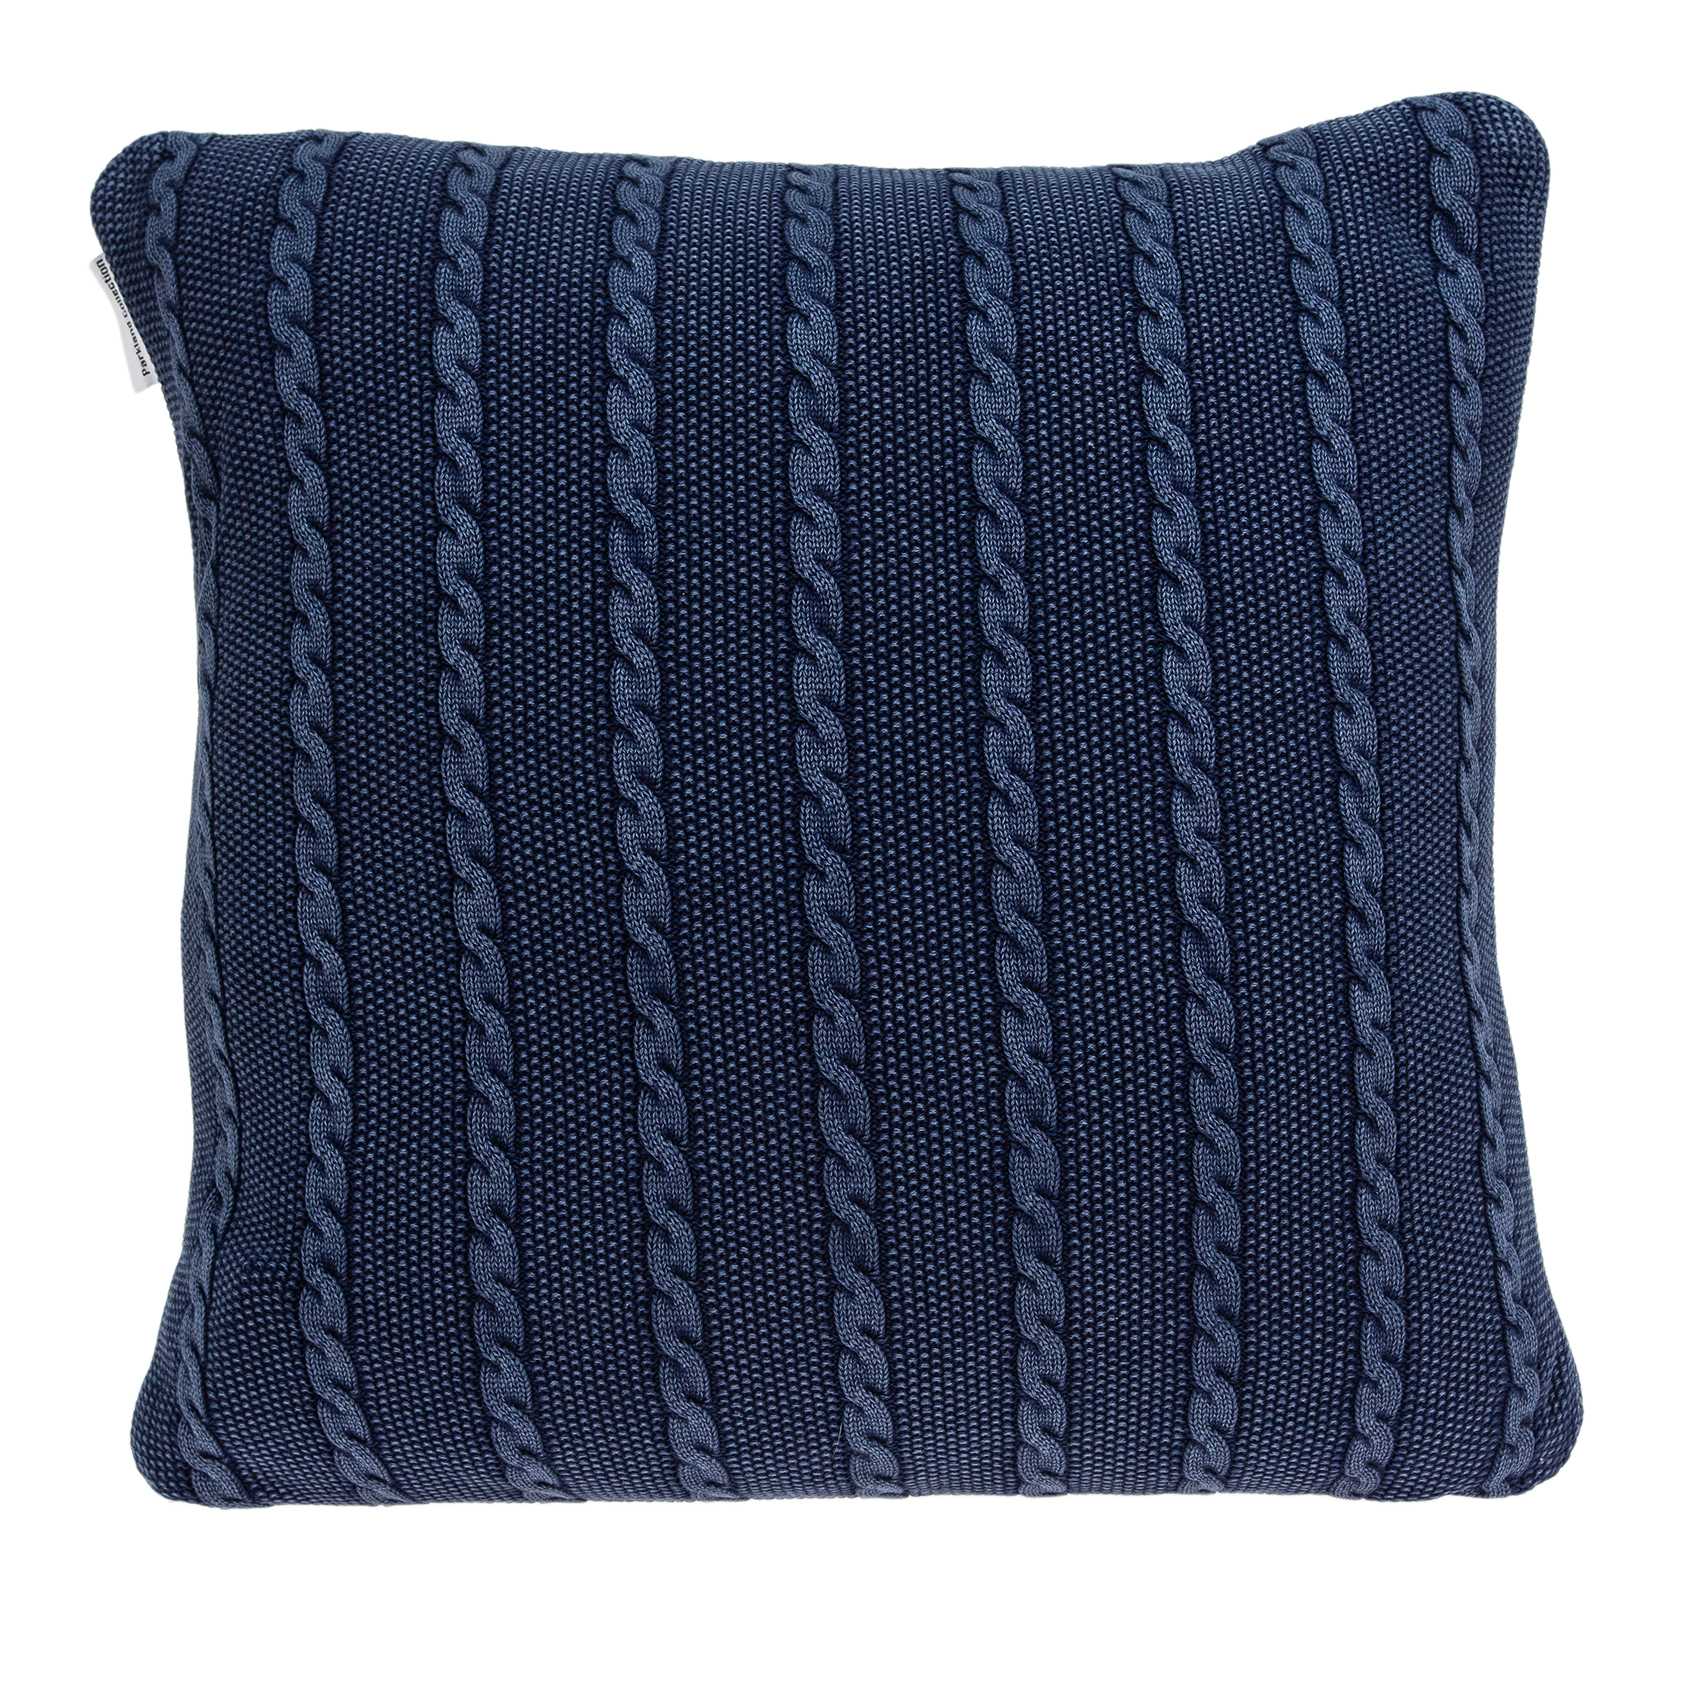 18" x 5" x 18" Transitional Blue Pillow Cover With Down Insert